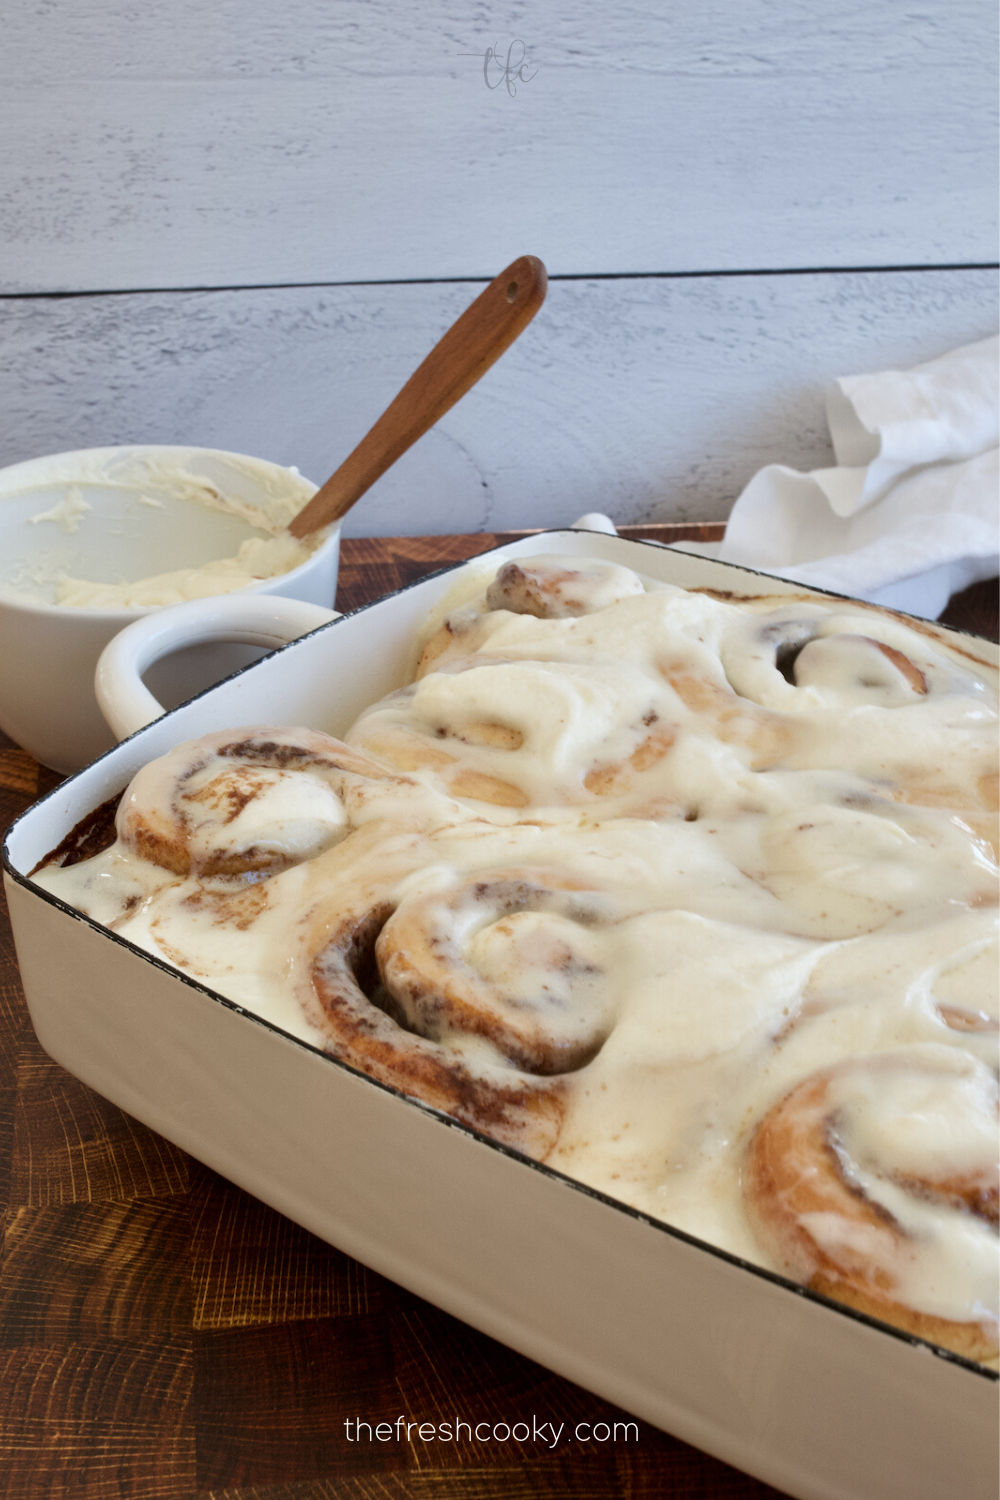 Image of a pan filled with soft, hot cinnamon buns covered in a thick layer of cream cheese cinnabon frosting.